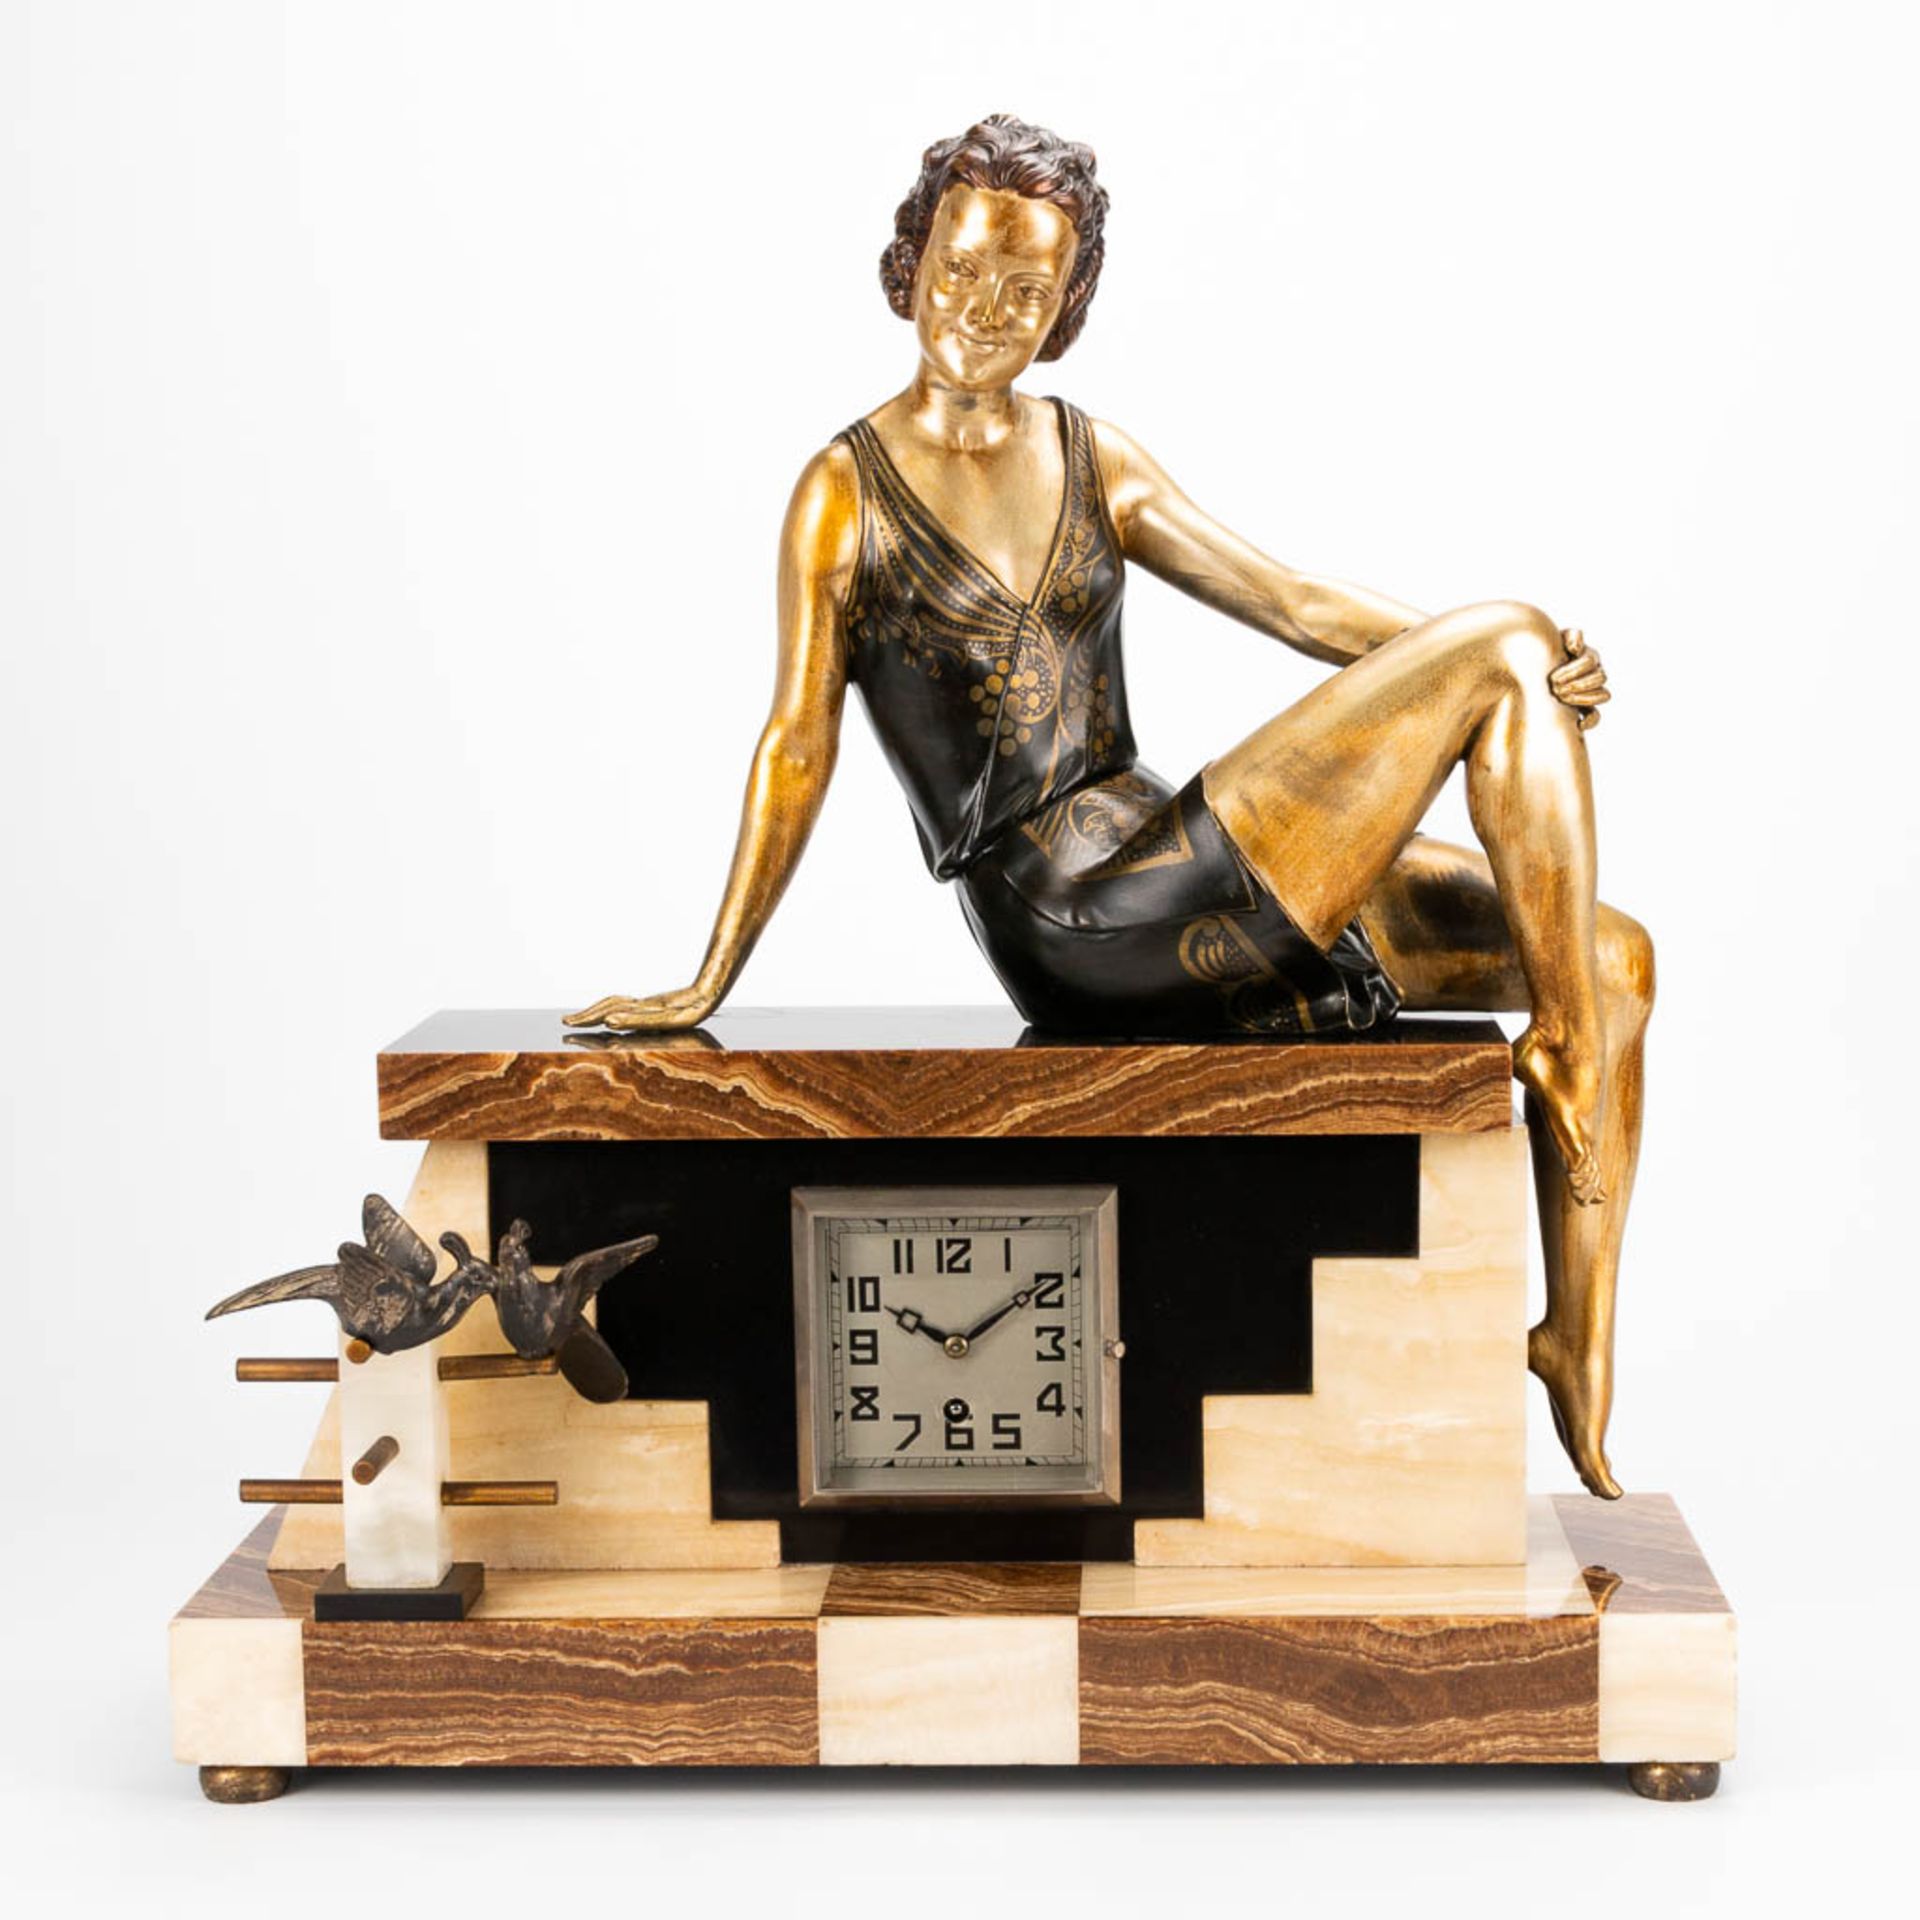 Enrique MOLINS-BALLESTE (1893-1958) A clock made of alabaster and onyx in Art Deco style, with a spe